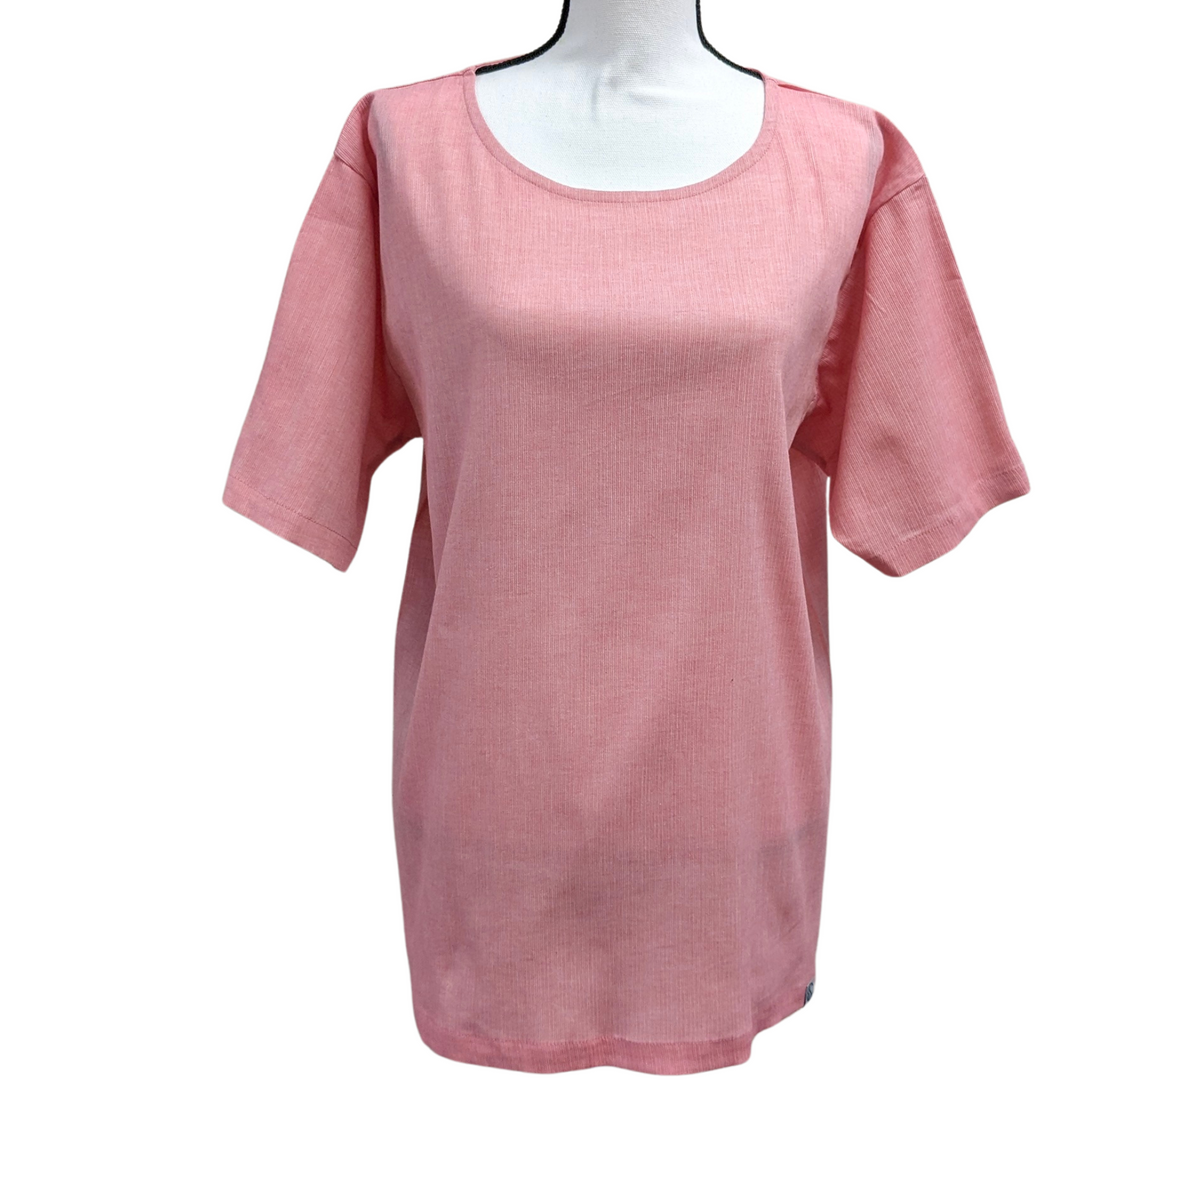 Cool, Stretchy, Comfy Lounge T-Shirt | Unisex | Solid Color | Pink, Navy, Gray - CHERRYSTONEstyle